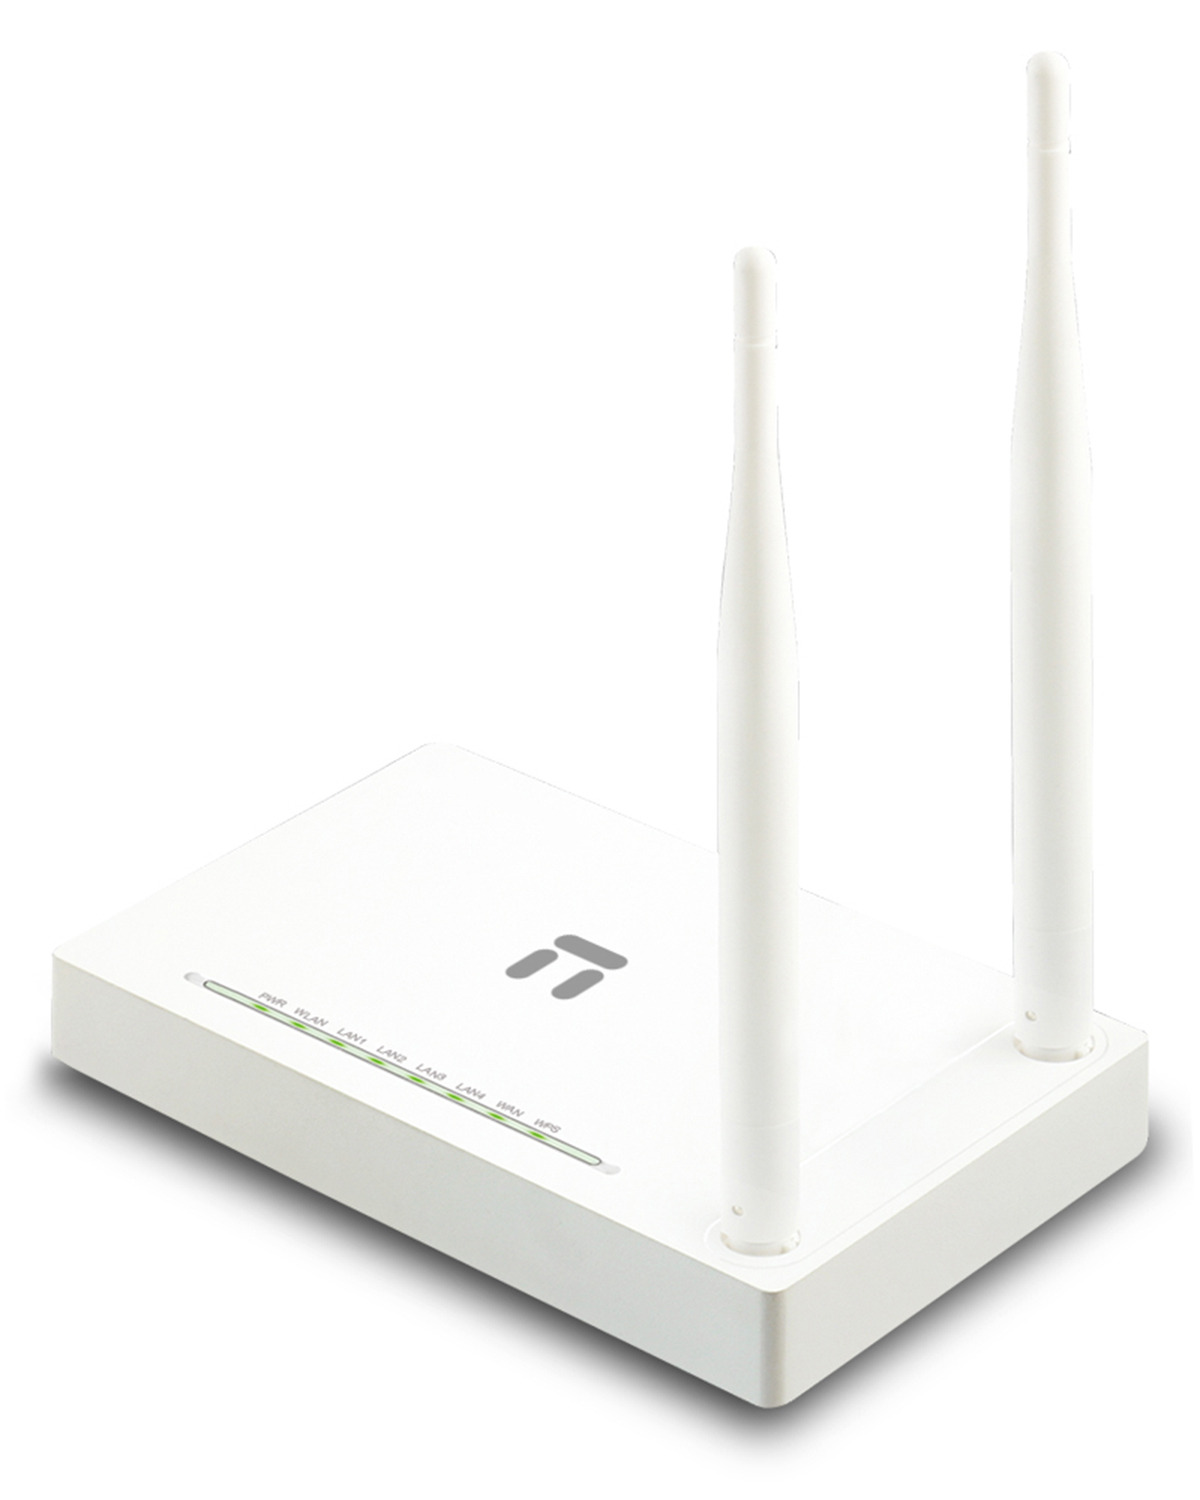 NET-LINK UPS ROUTER 10400 MAH 300Mbps Wireless N Router - Yallah Shop  E-Commerce Website